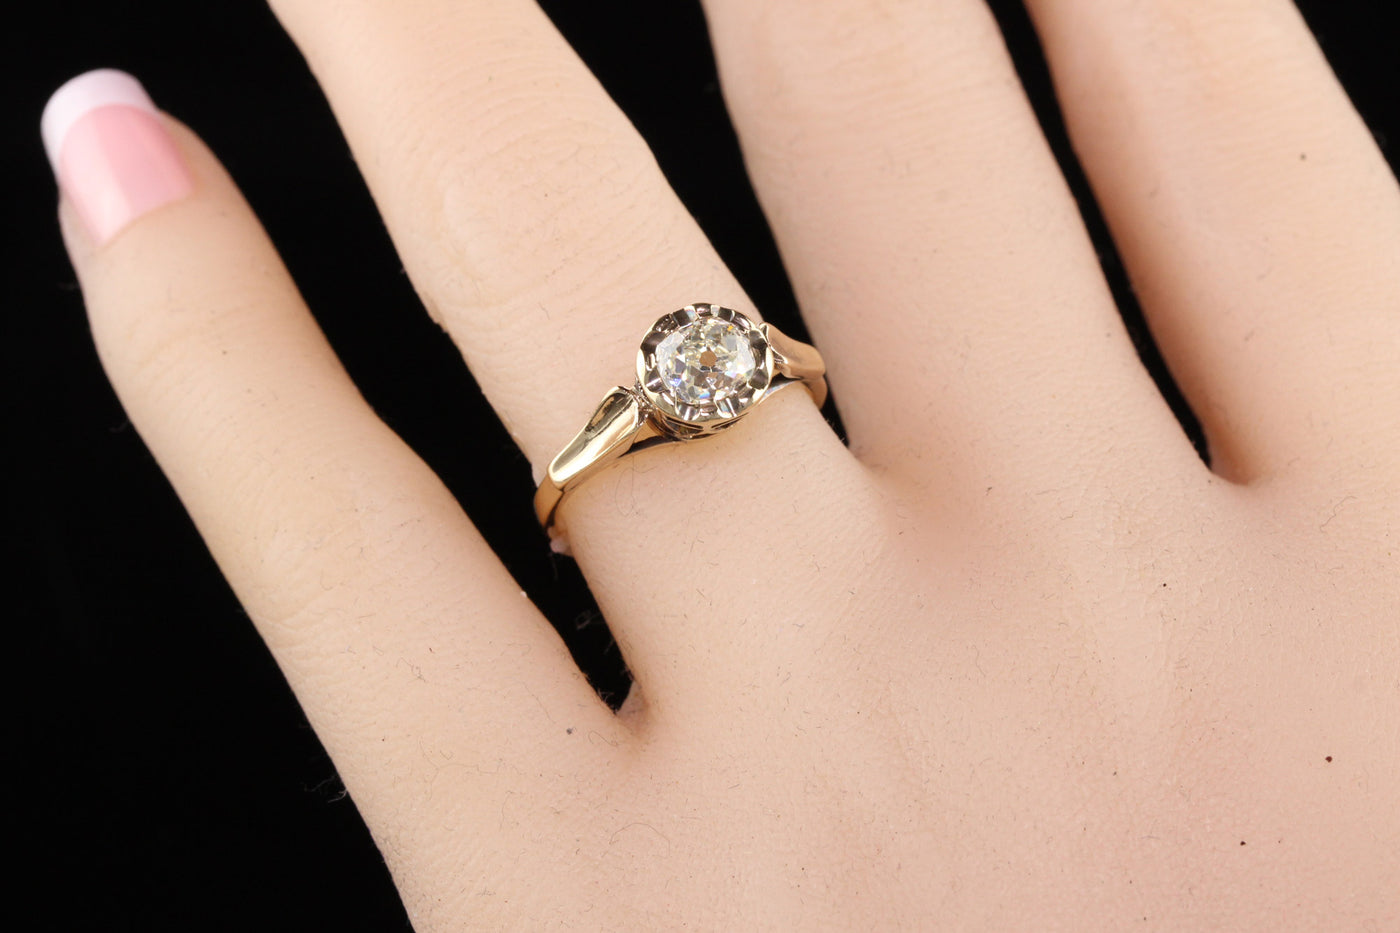 Antique Victorian 18K Yellow Gold Old Mine Cut Diamond Engagement Ring